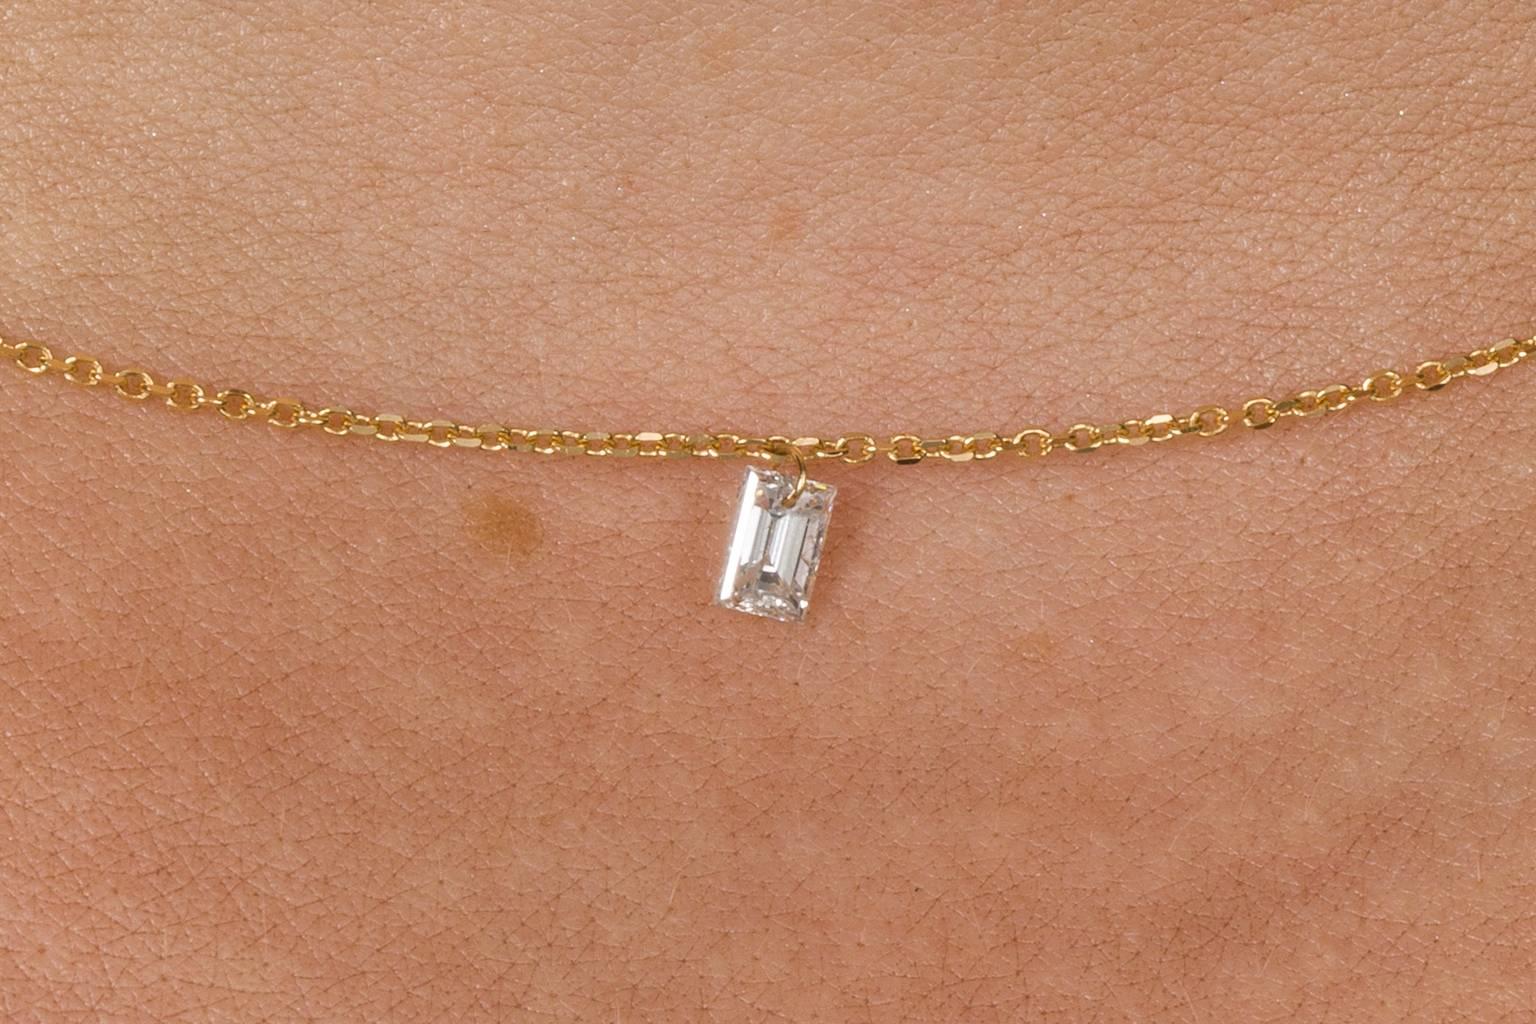 This pretty necklace has the most delicate look to it. A beautiful 18k yellow gold very fine trace link chain with a baguette cut diamond weighing 0.195cts hangs from a small gold jump ring. A hint of sparkle can been seen with the movement of your